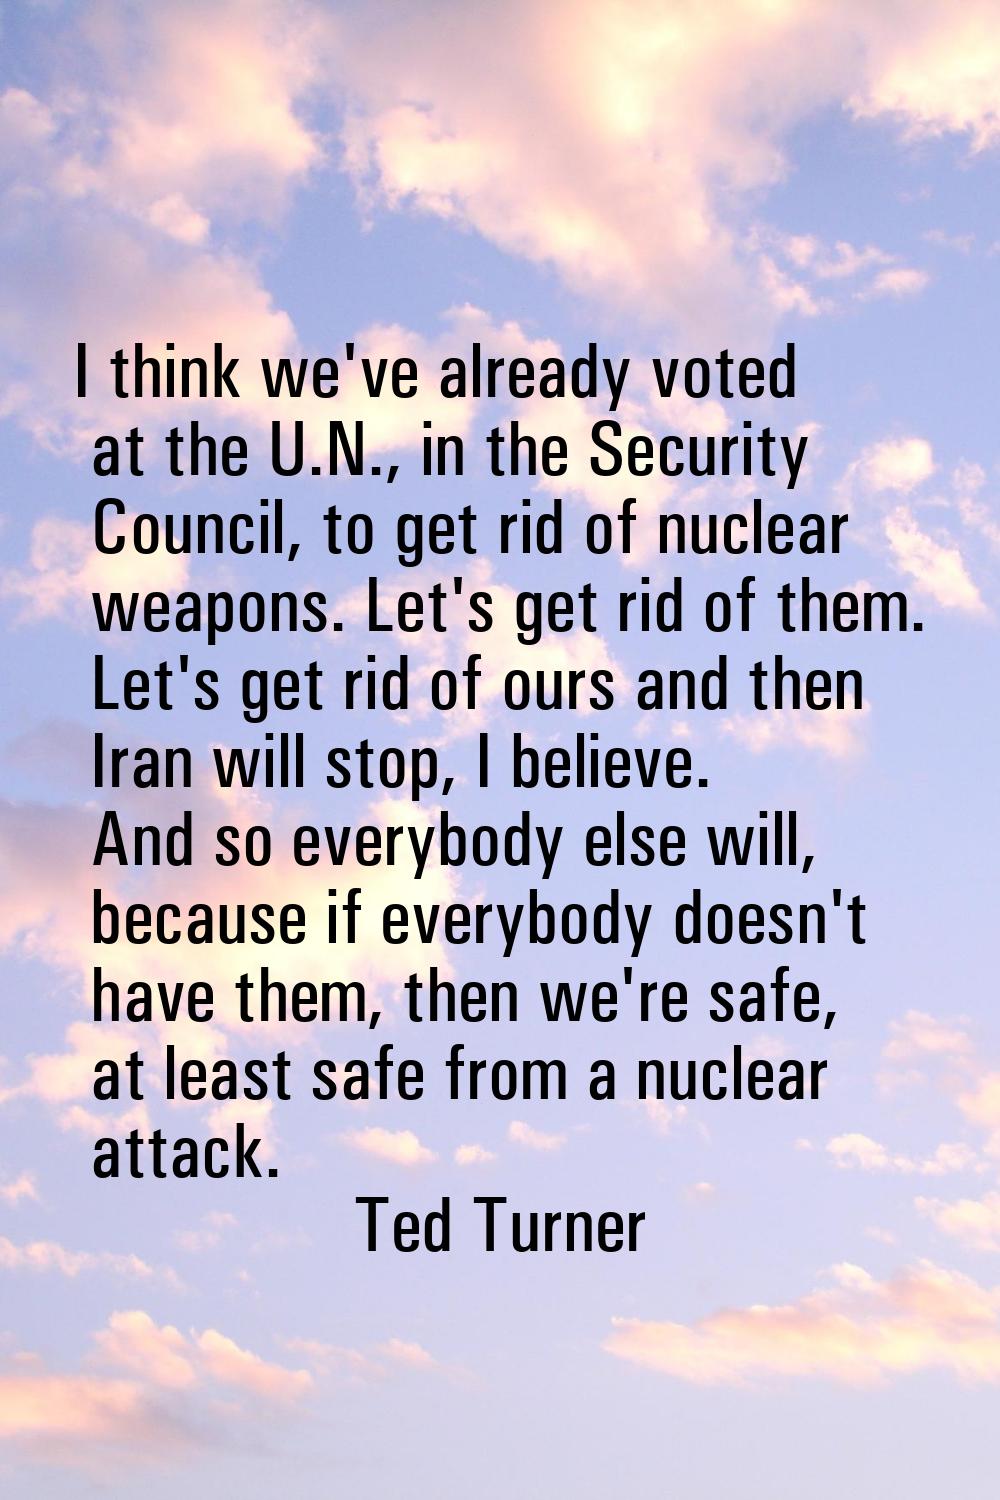 I think we've already voted at the U.N., in the Security Council, to get rid of nuclear weapons. Le